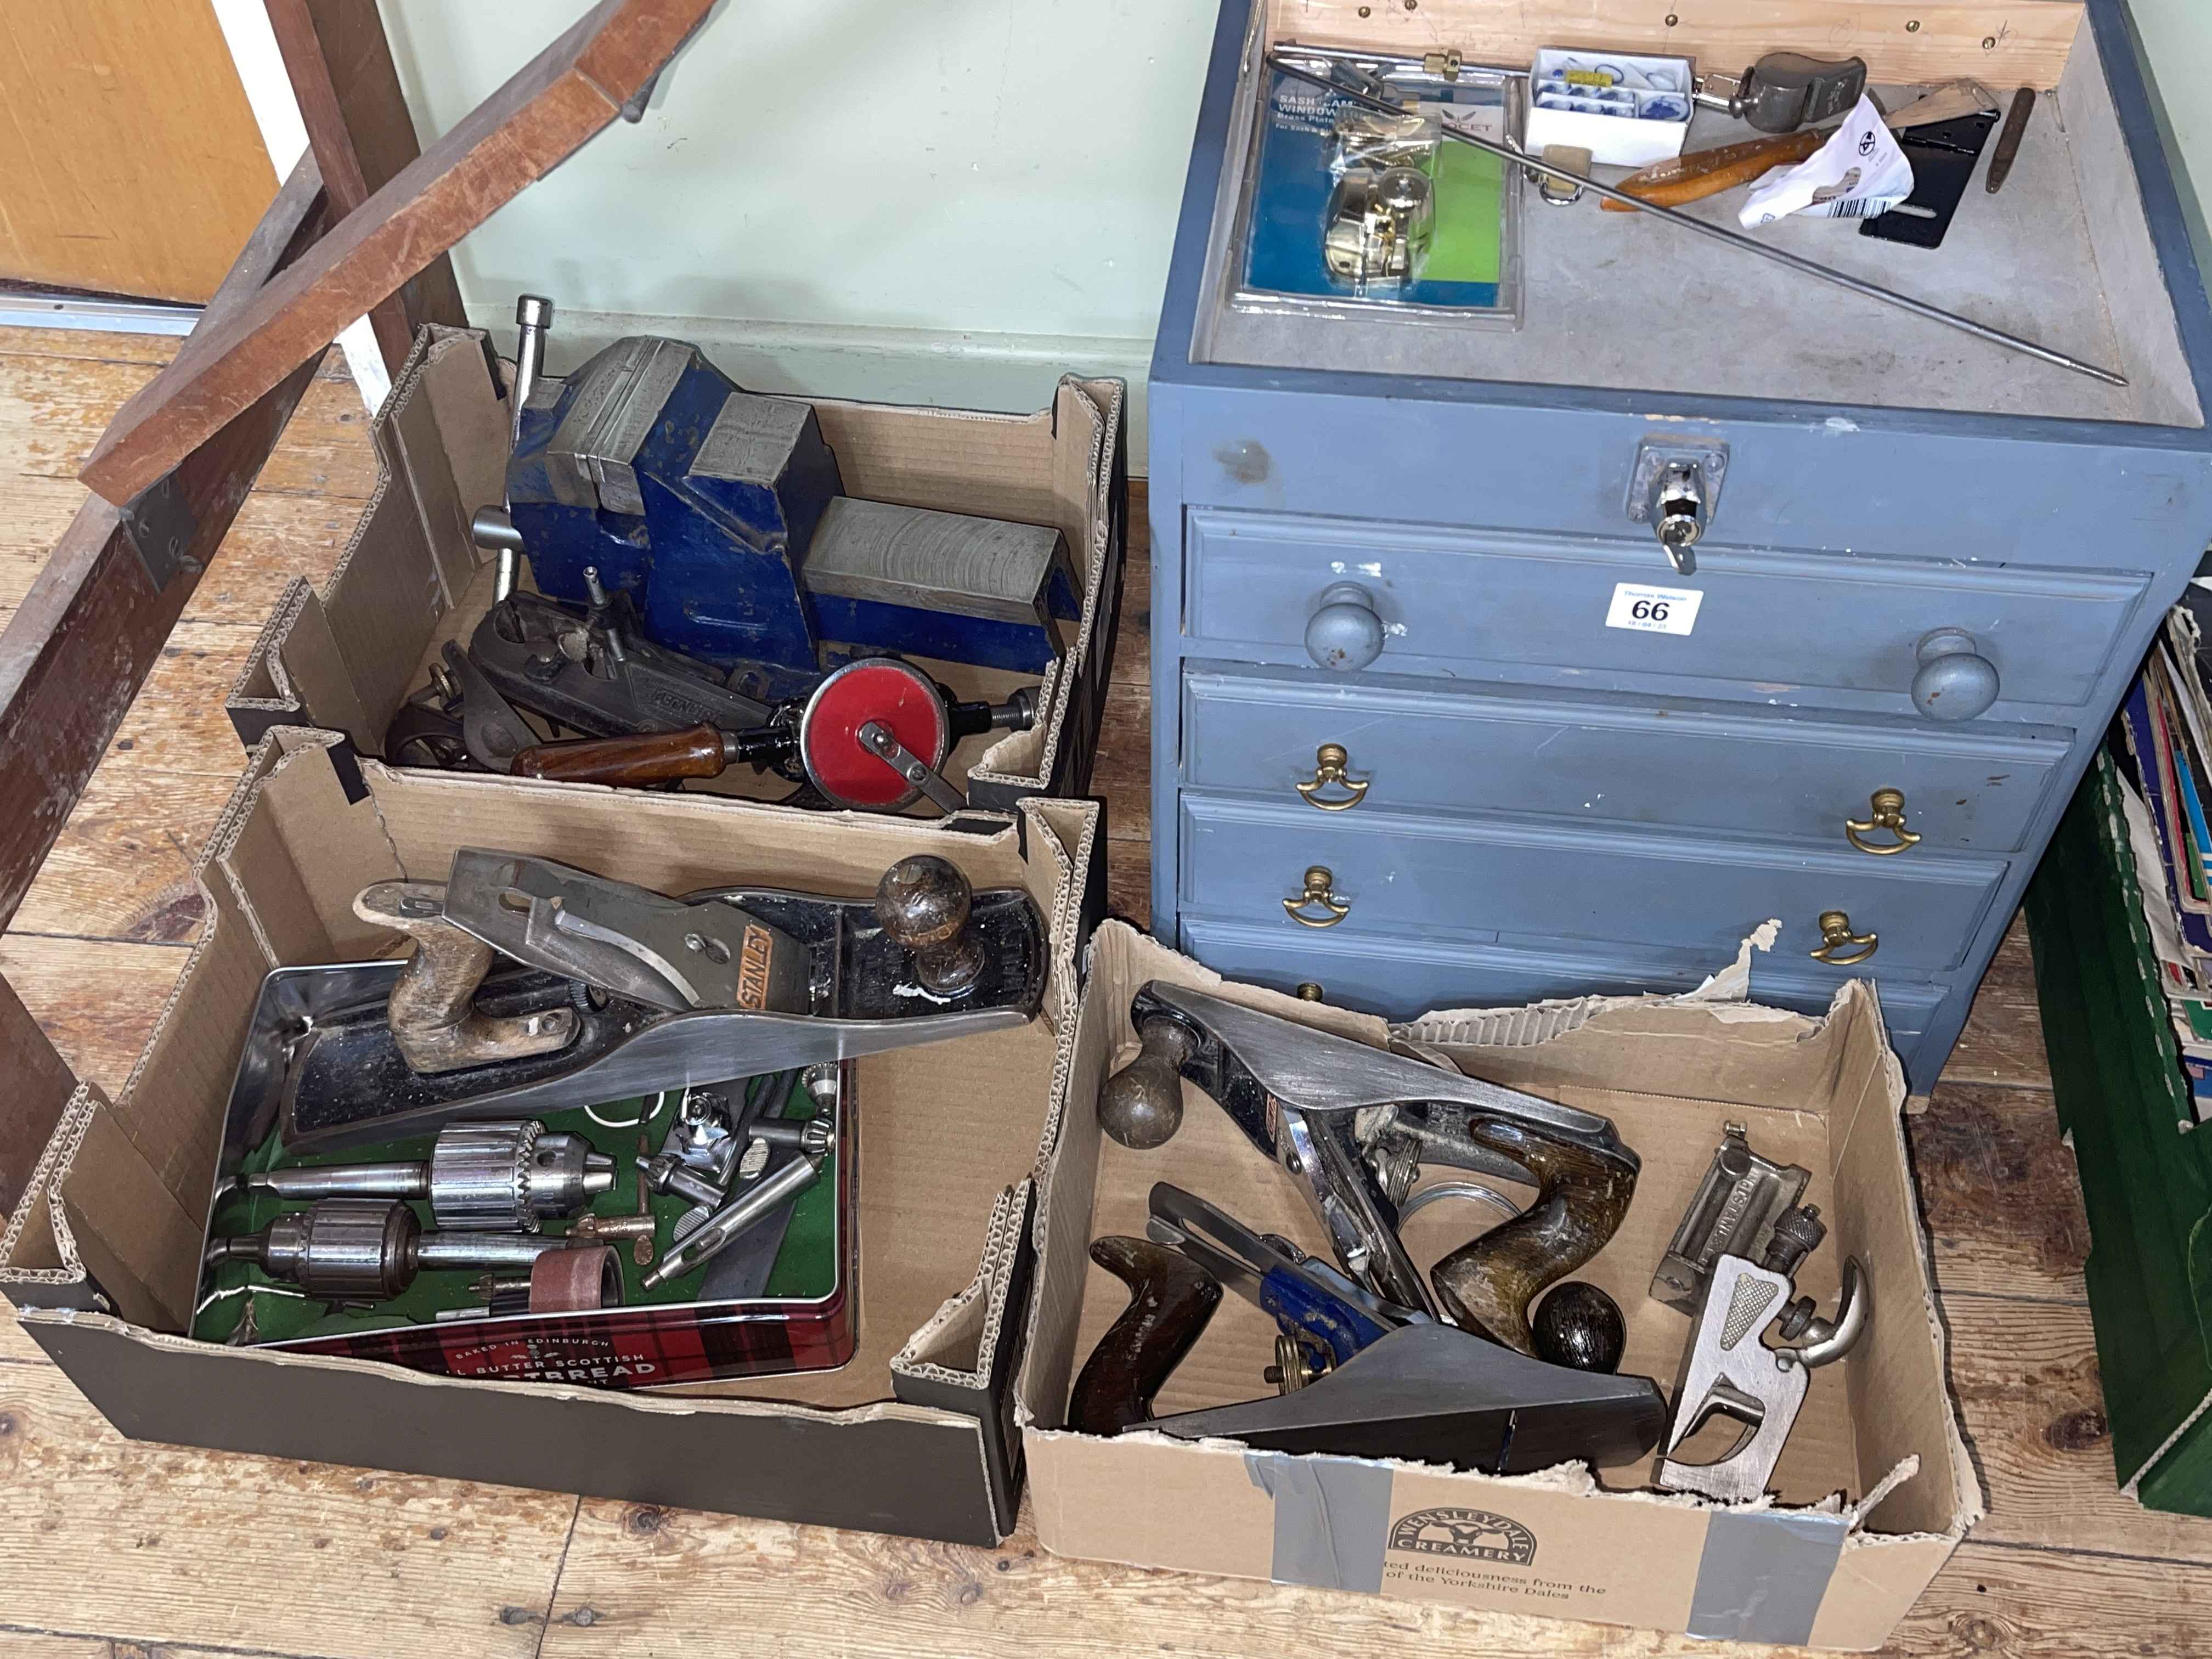 Tool chest, collection of tools including planes, vice, etc.